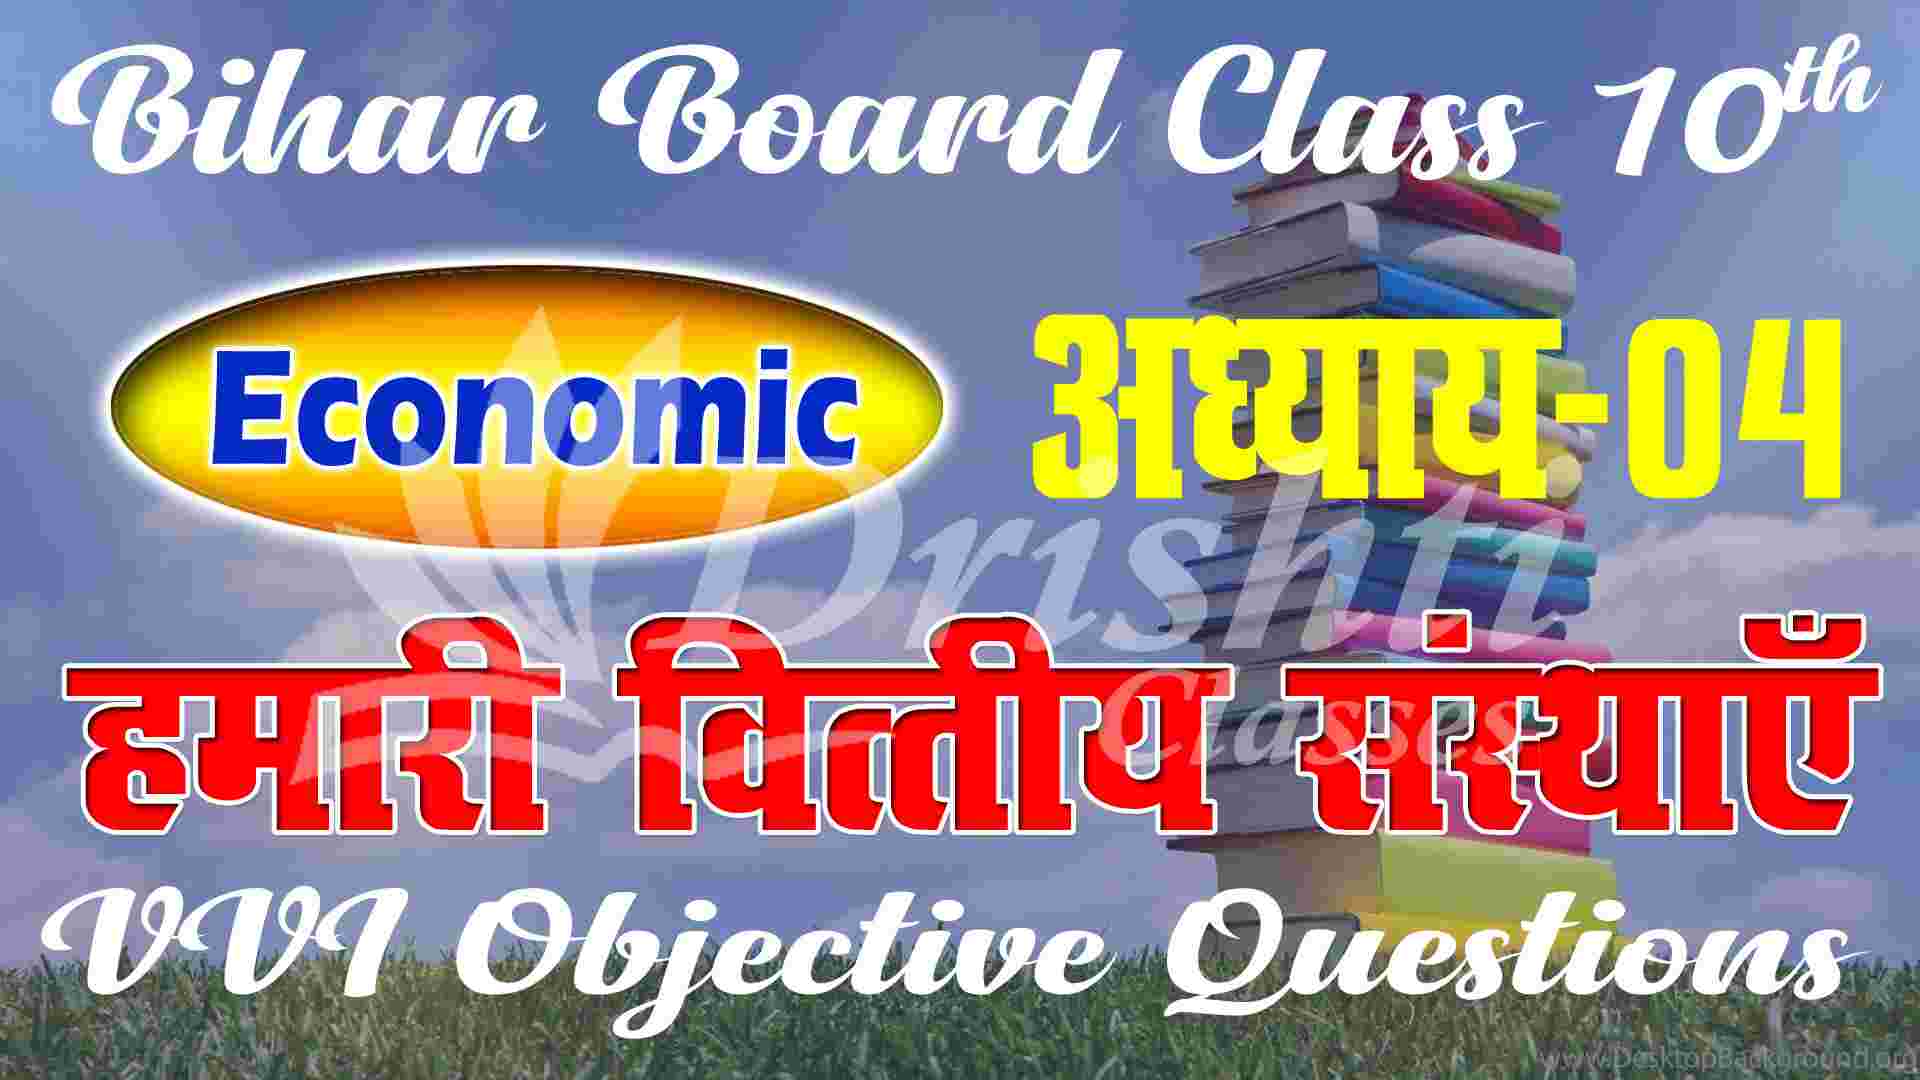 BSEB Class 10th Economics Chapter 4 Objective Question || हमारे वित्तीय संस्थाएं ऑब्जेक्टिव क्वेश्चन || Our Financial Institutions Objective Questions